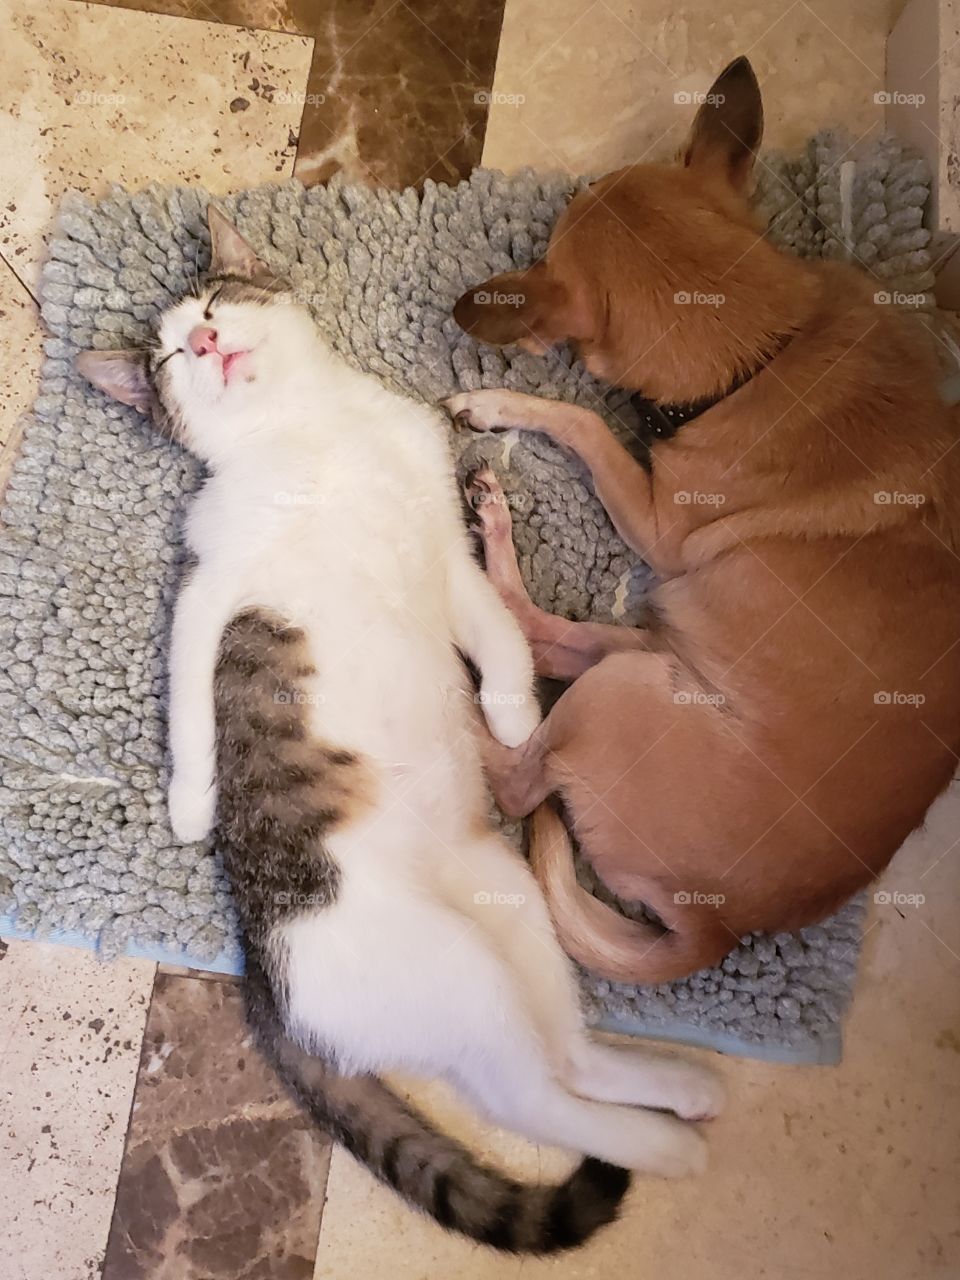 Real cat sleeping on his back next to chihuahua so sweet in bathroom peacefully